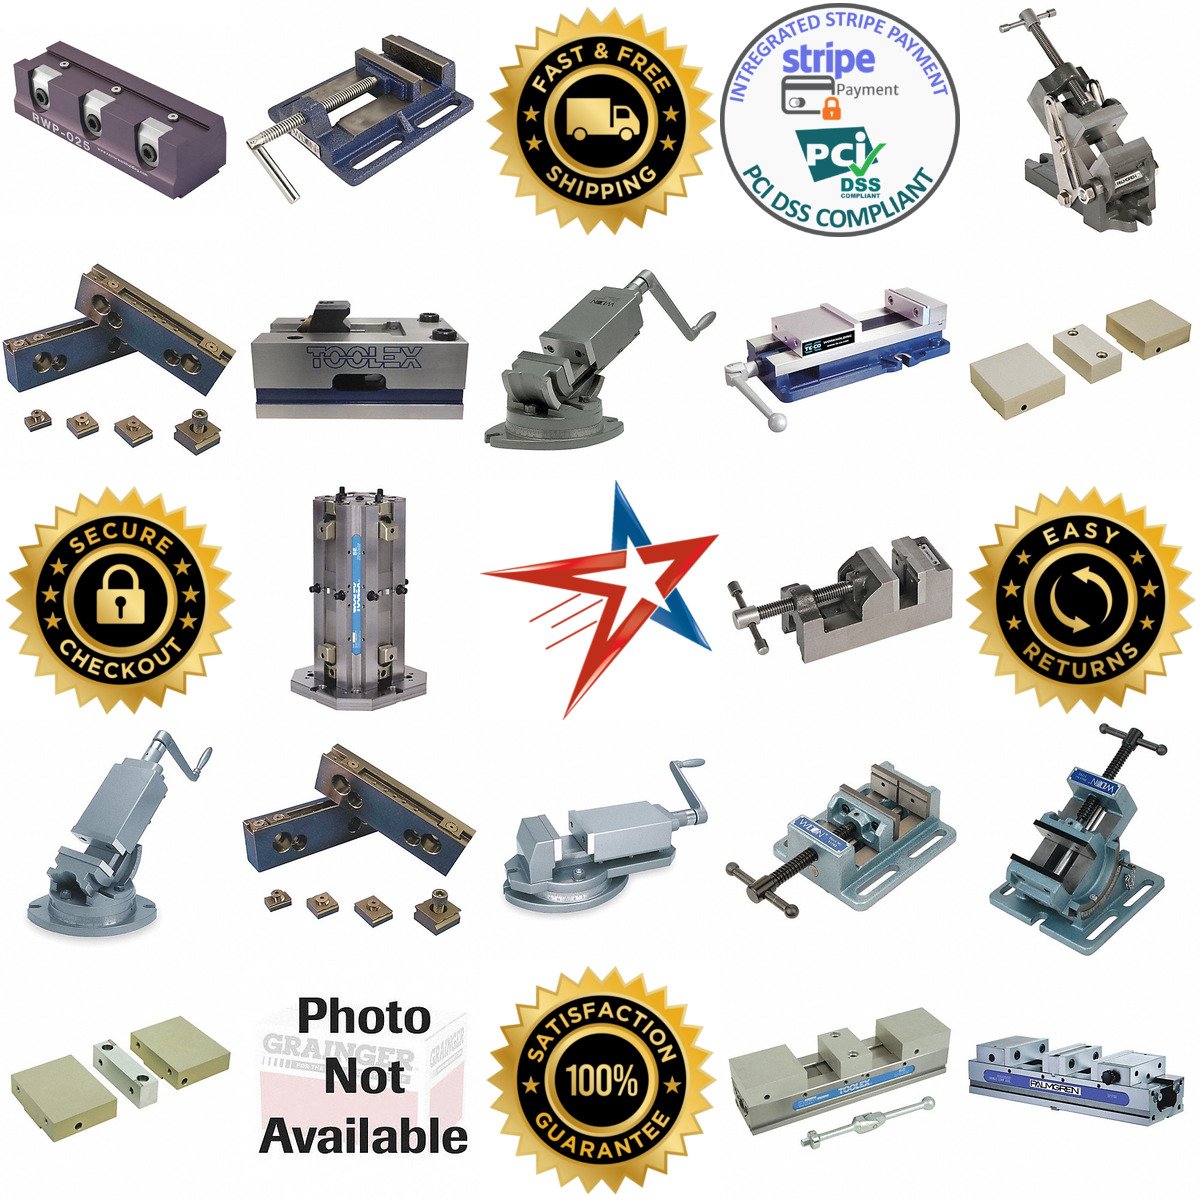 A selection of Clamping Workholding and Positioning   Machine v products on GoVets